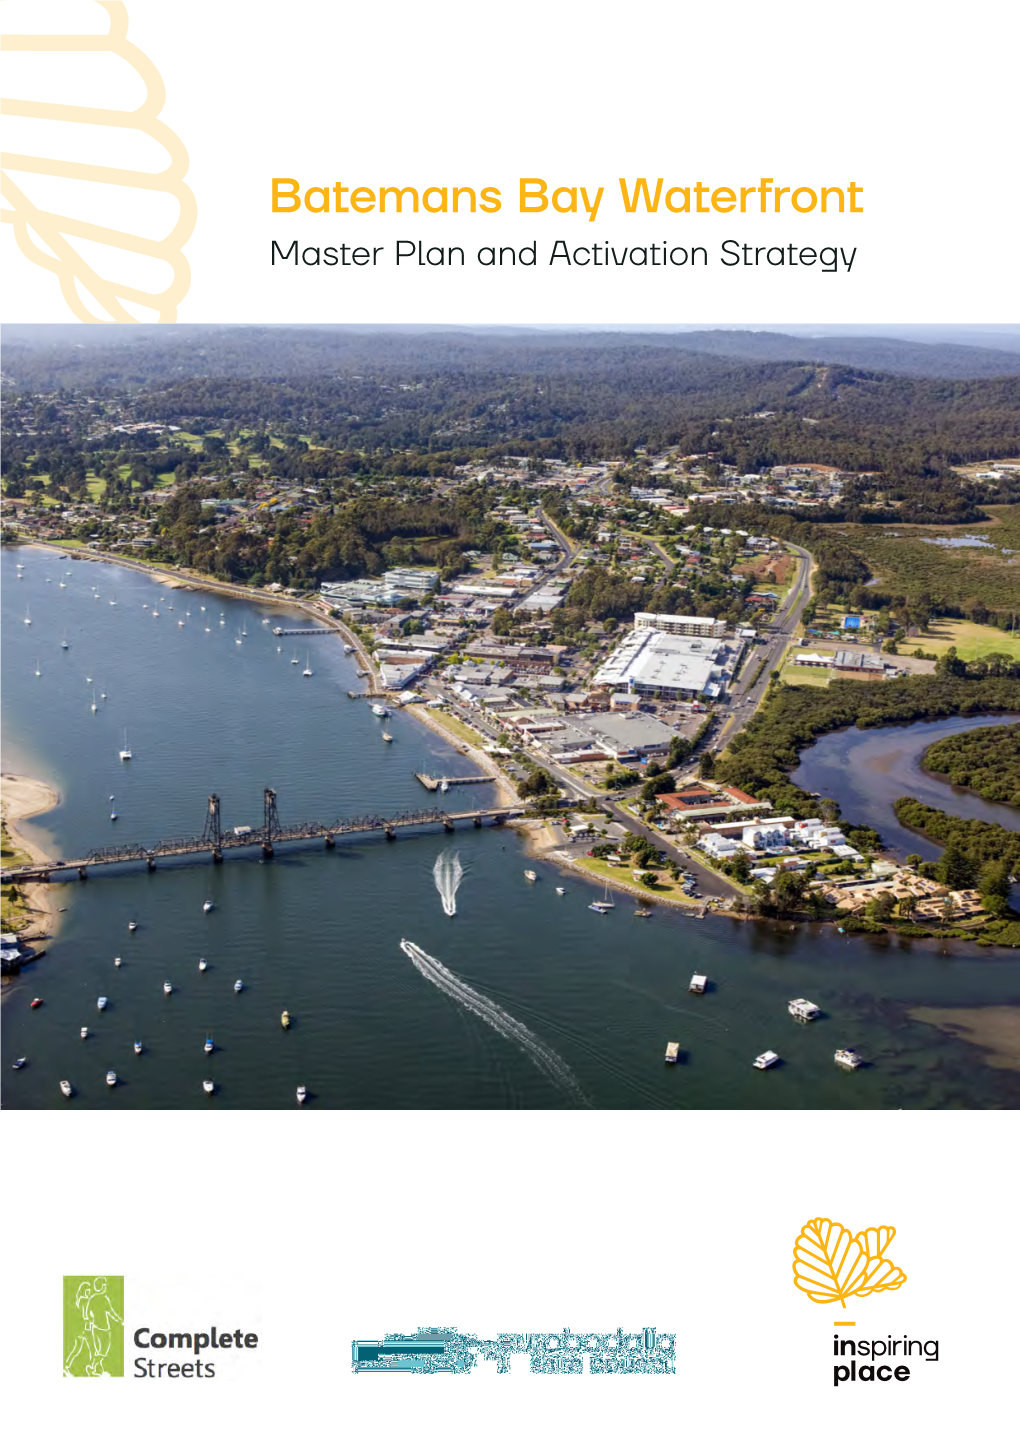 Batemans Bay Waterfront Master Plan and Activation Strategy